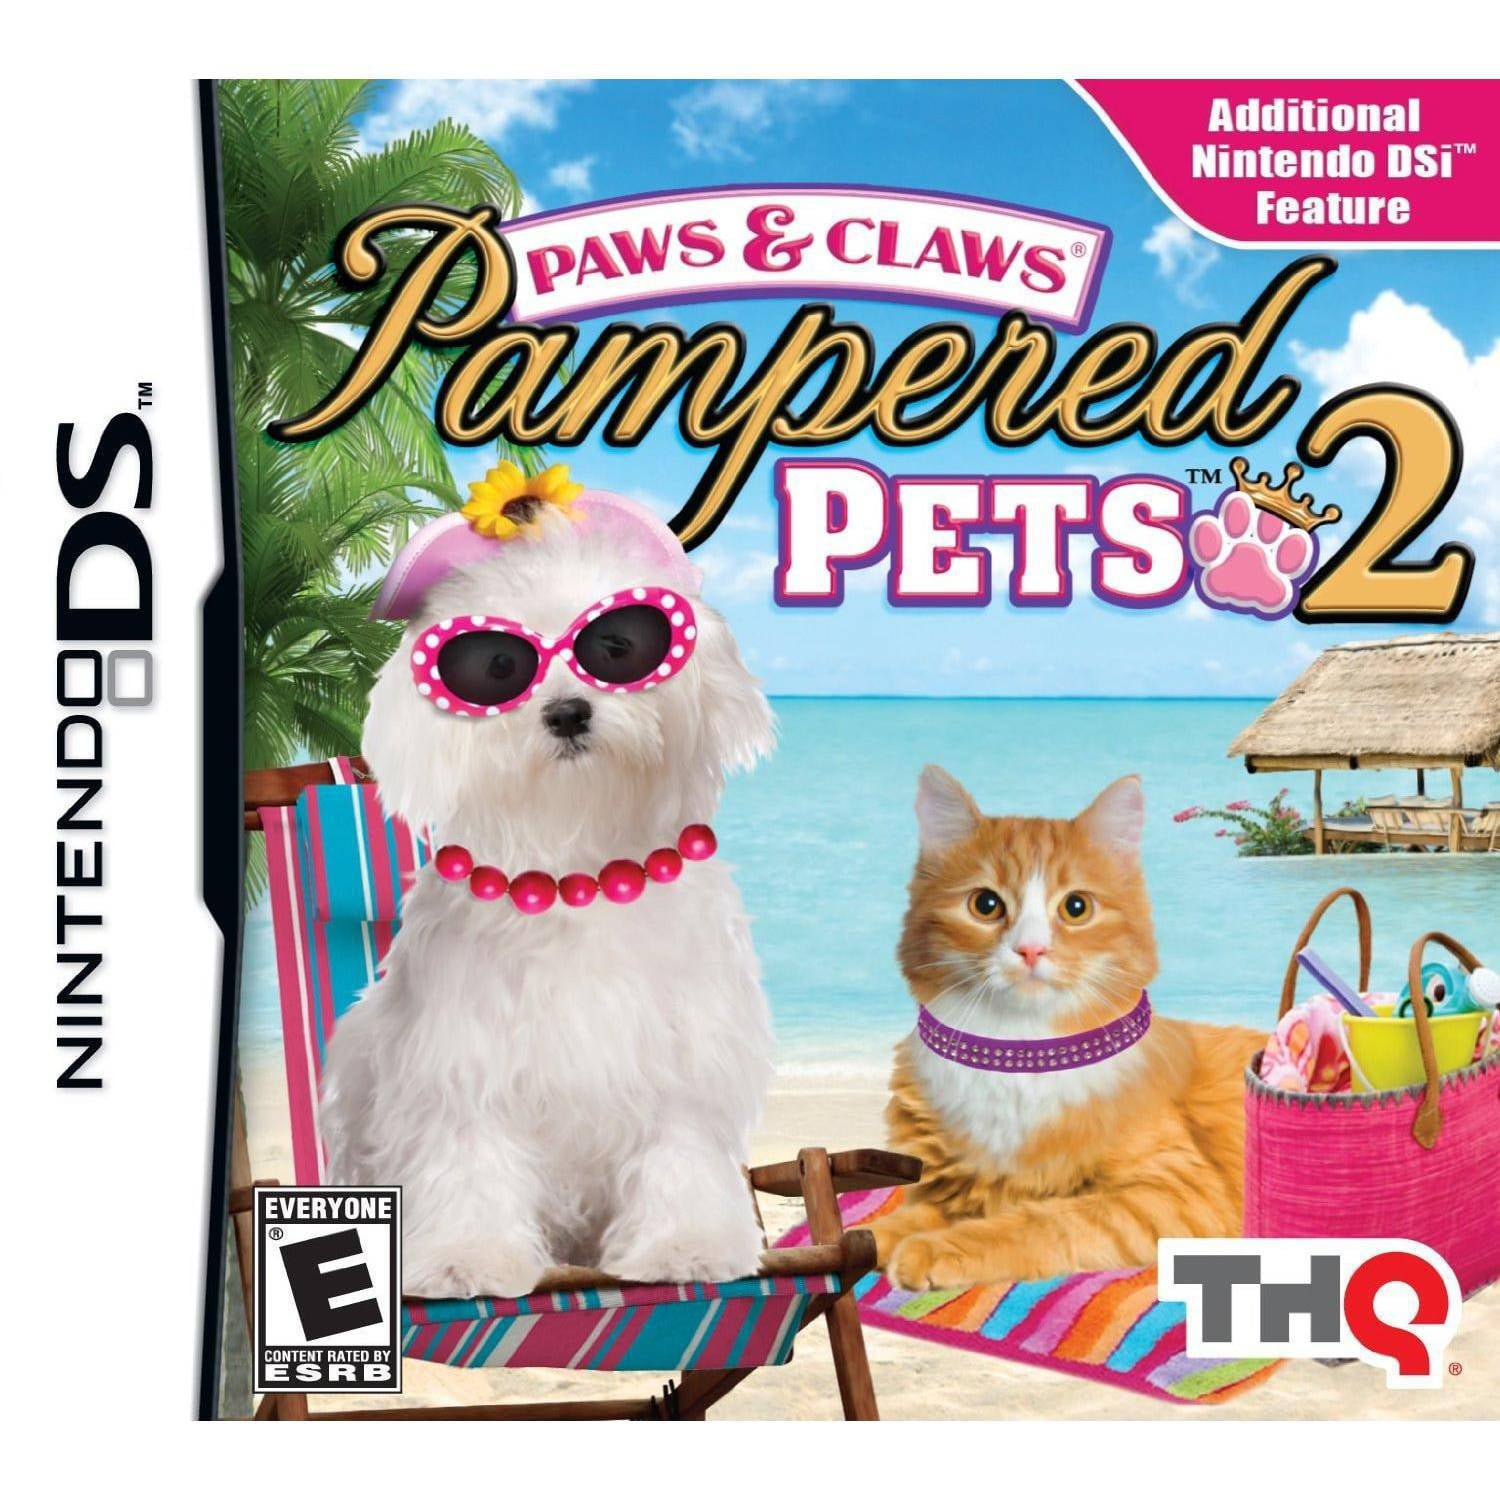 Paws and Claws: Pet Resort Nintendo DS Used